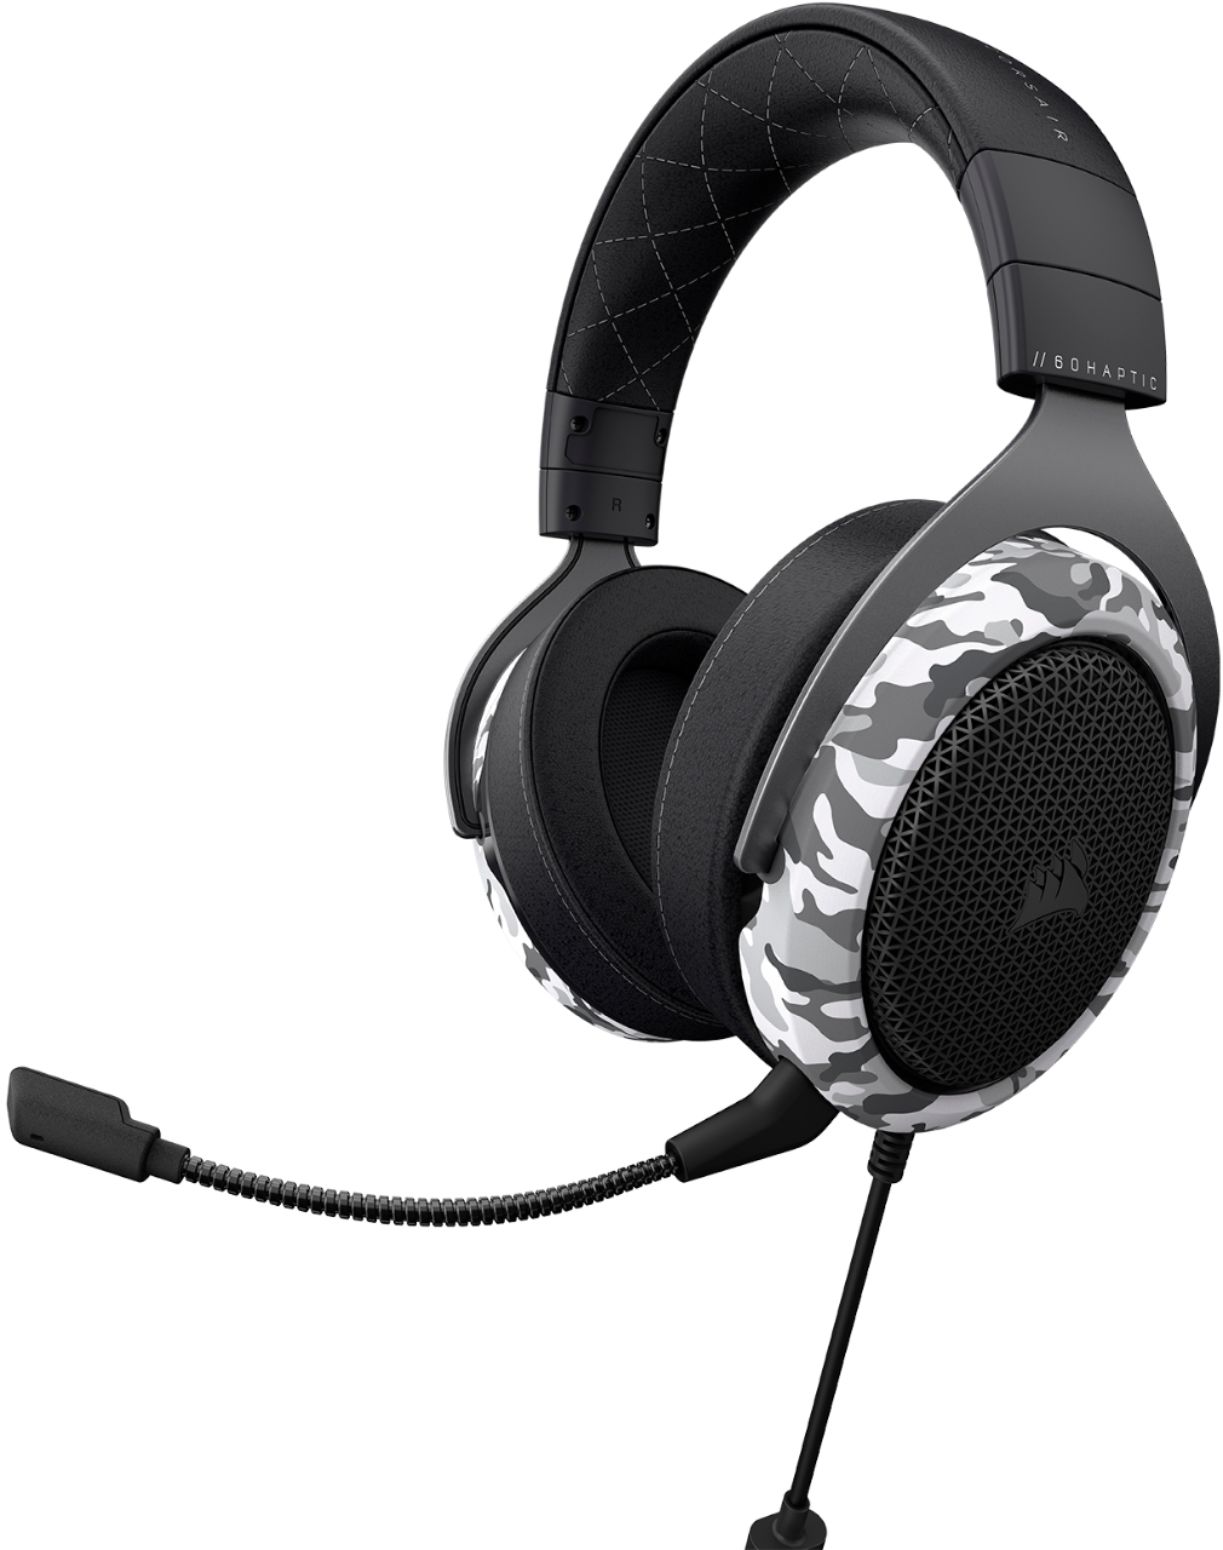 CORSAIR HS60 Stereo Gaming Headset for PC with Haptic Bass Black and White Camo CA-9011225-NA - Best Buy